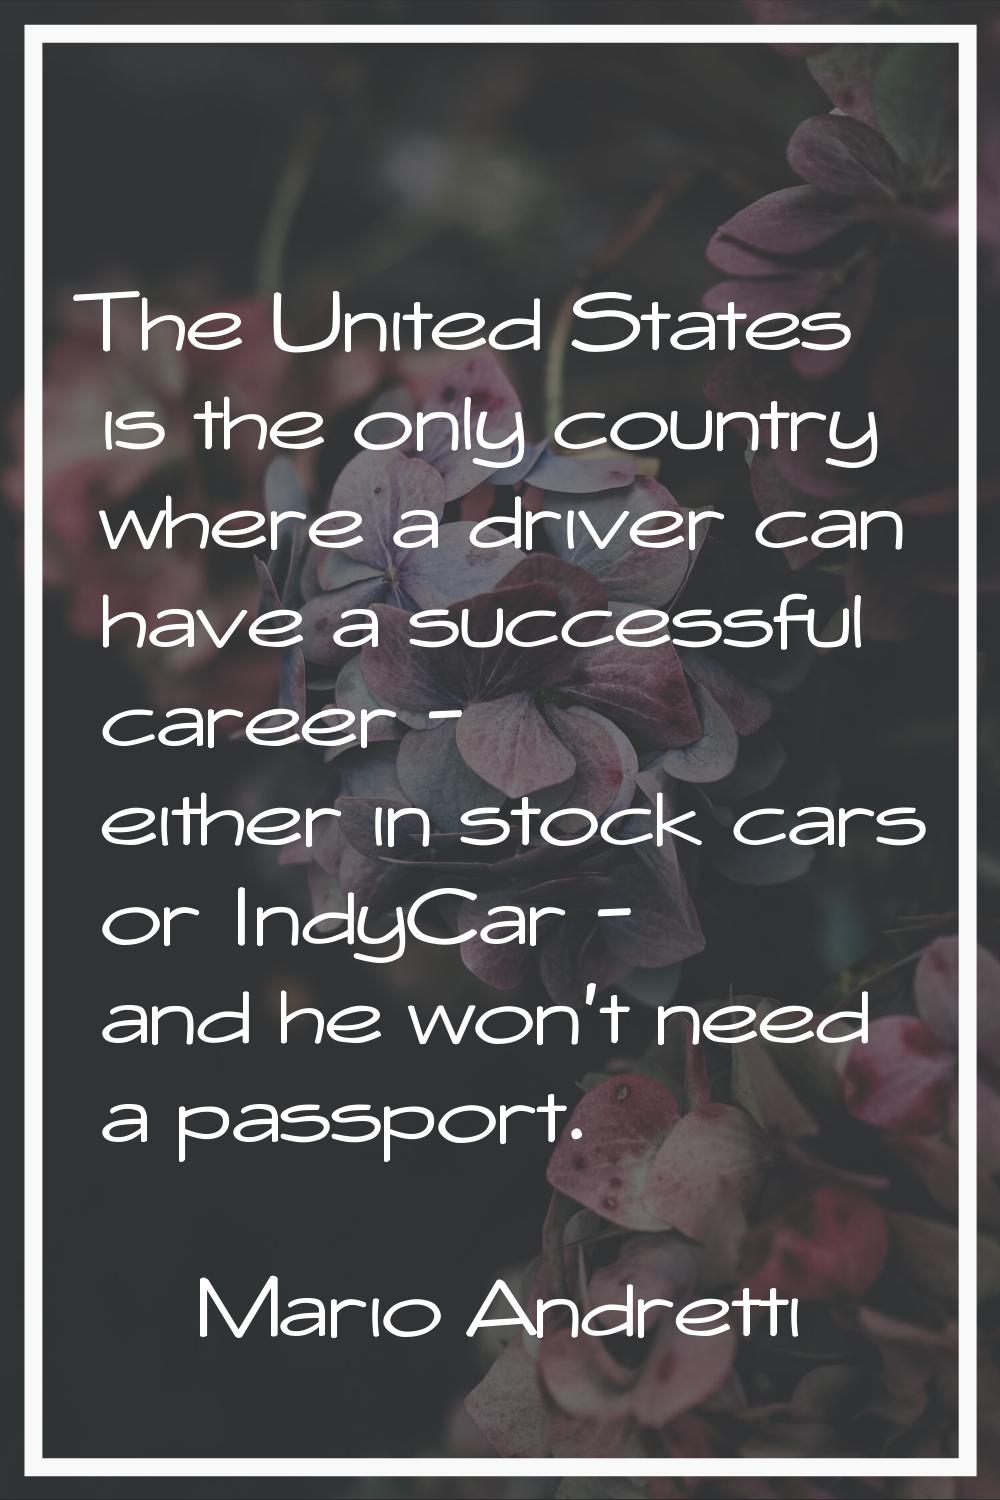 The United States is the only country where a driver can have a successful career - either in stock